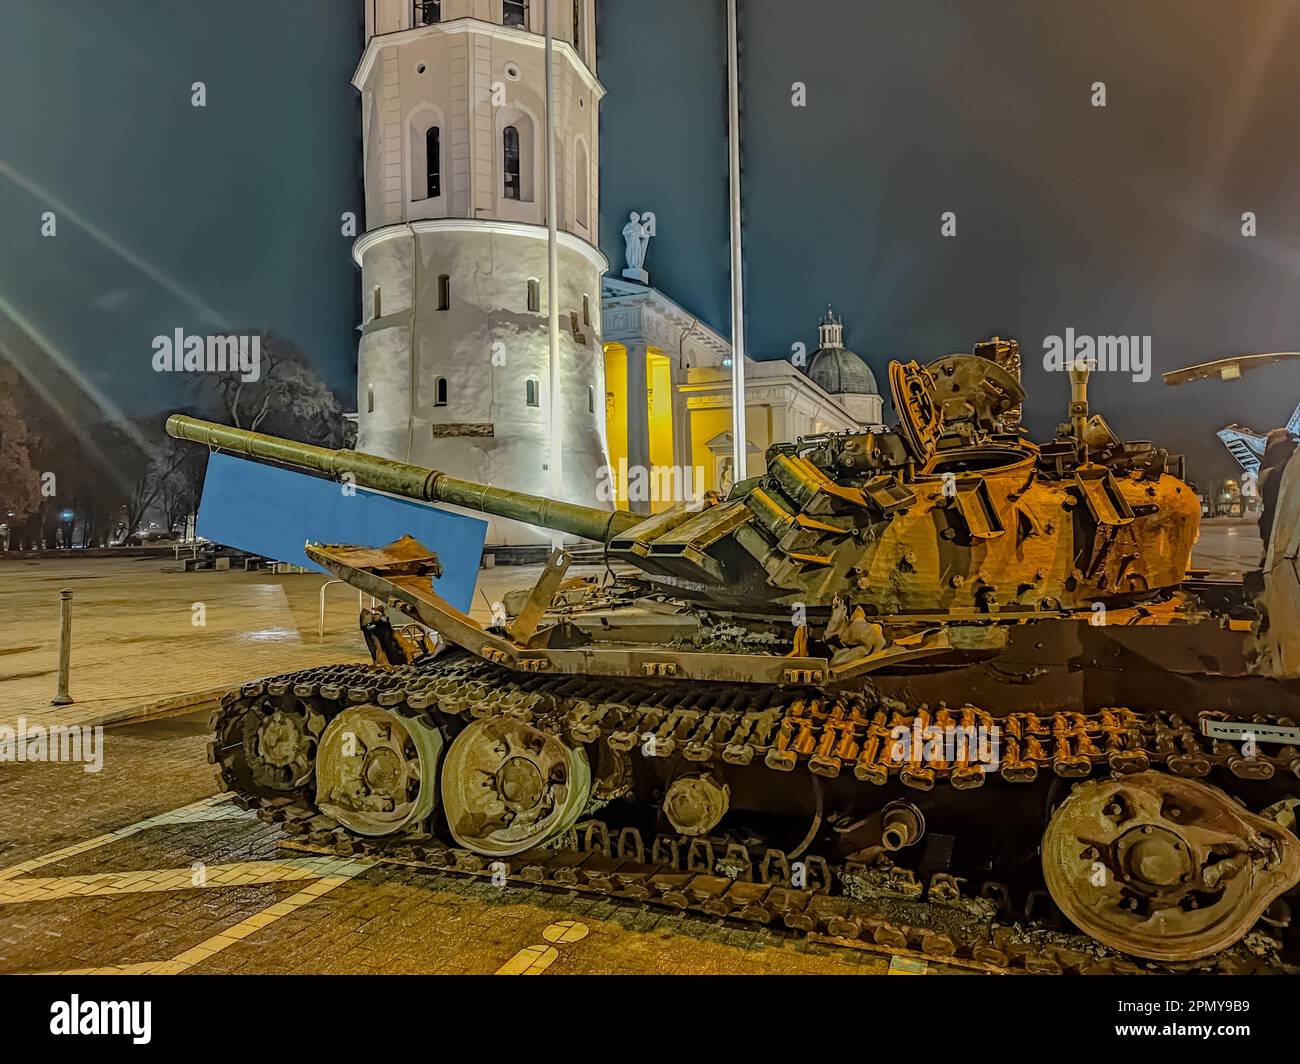 A destroyed Russian tank standing at night in the old town of Vilnius. Battle tank destroyed during hostilities in Russian invasion of Ukraine, 2022 Stock Photo